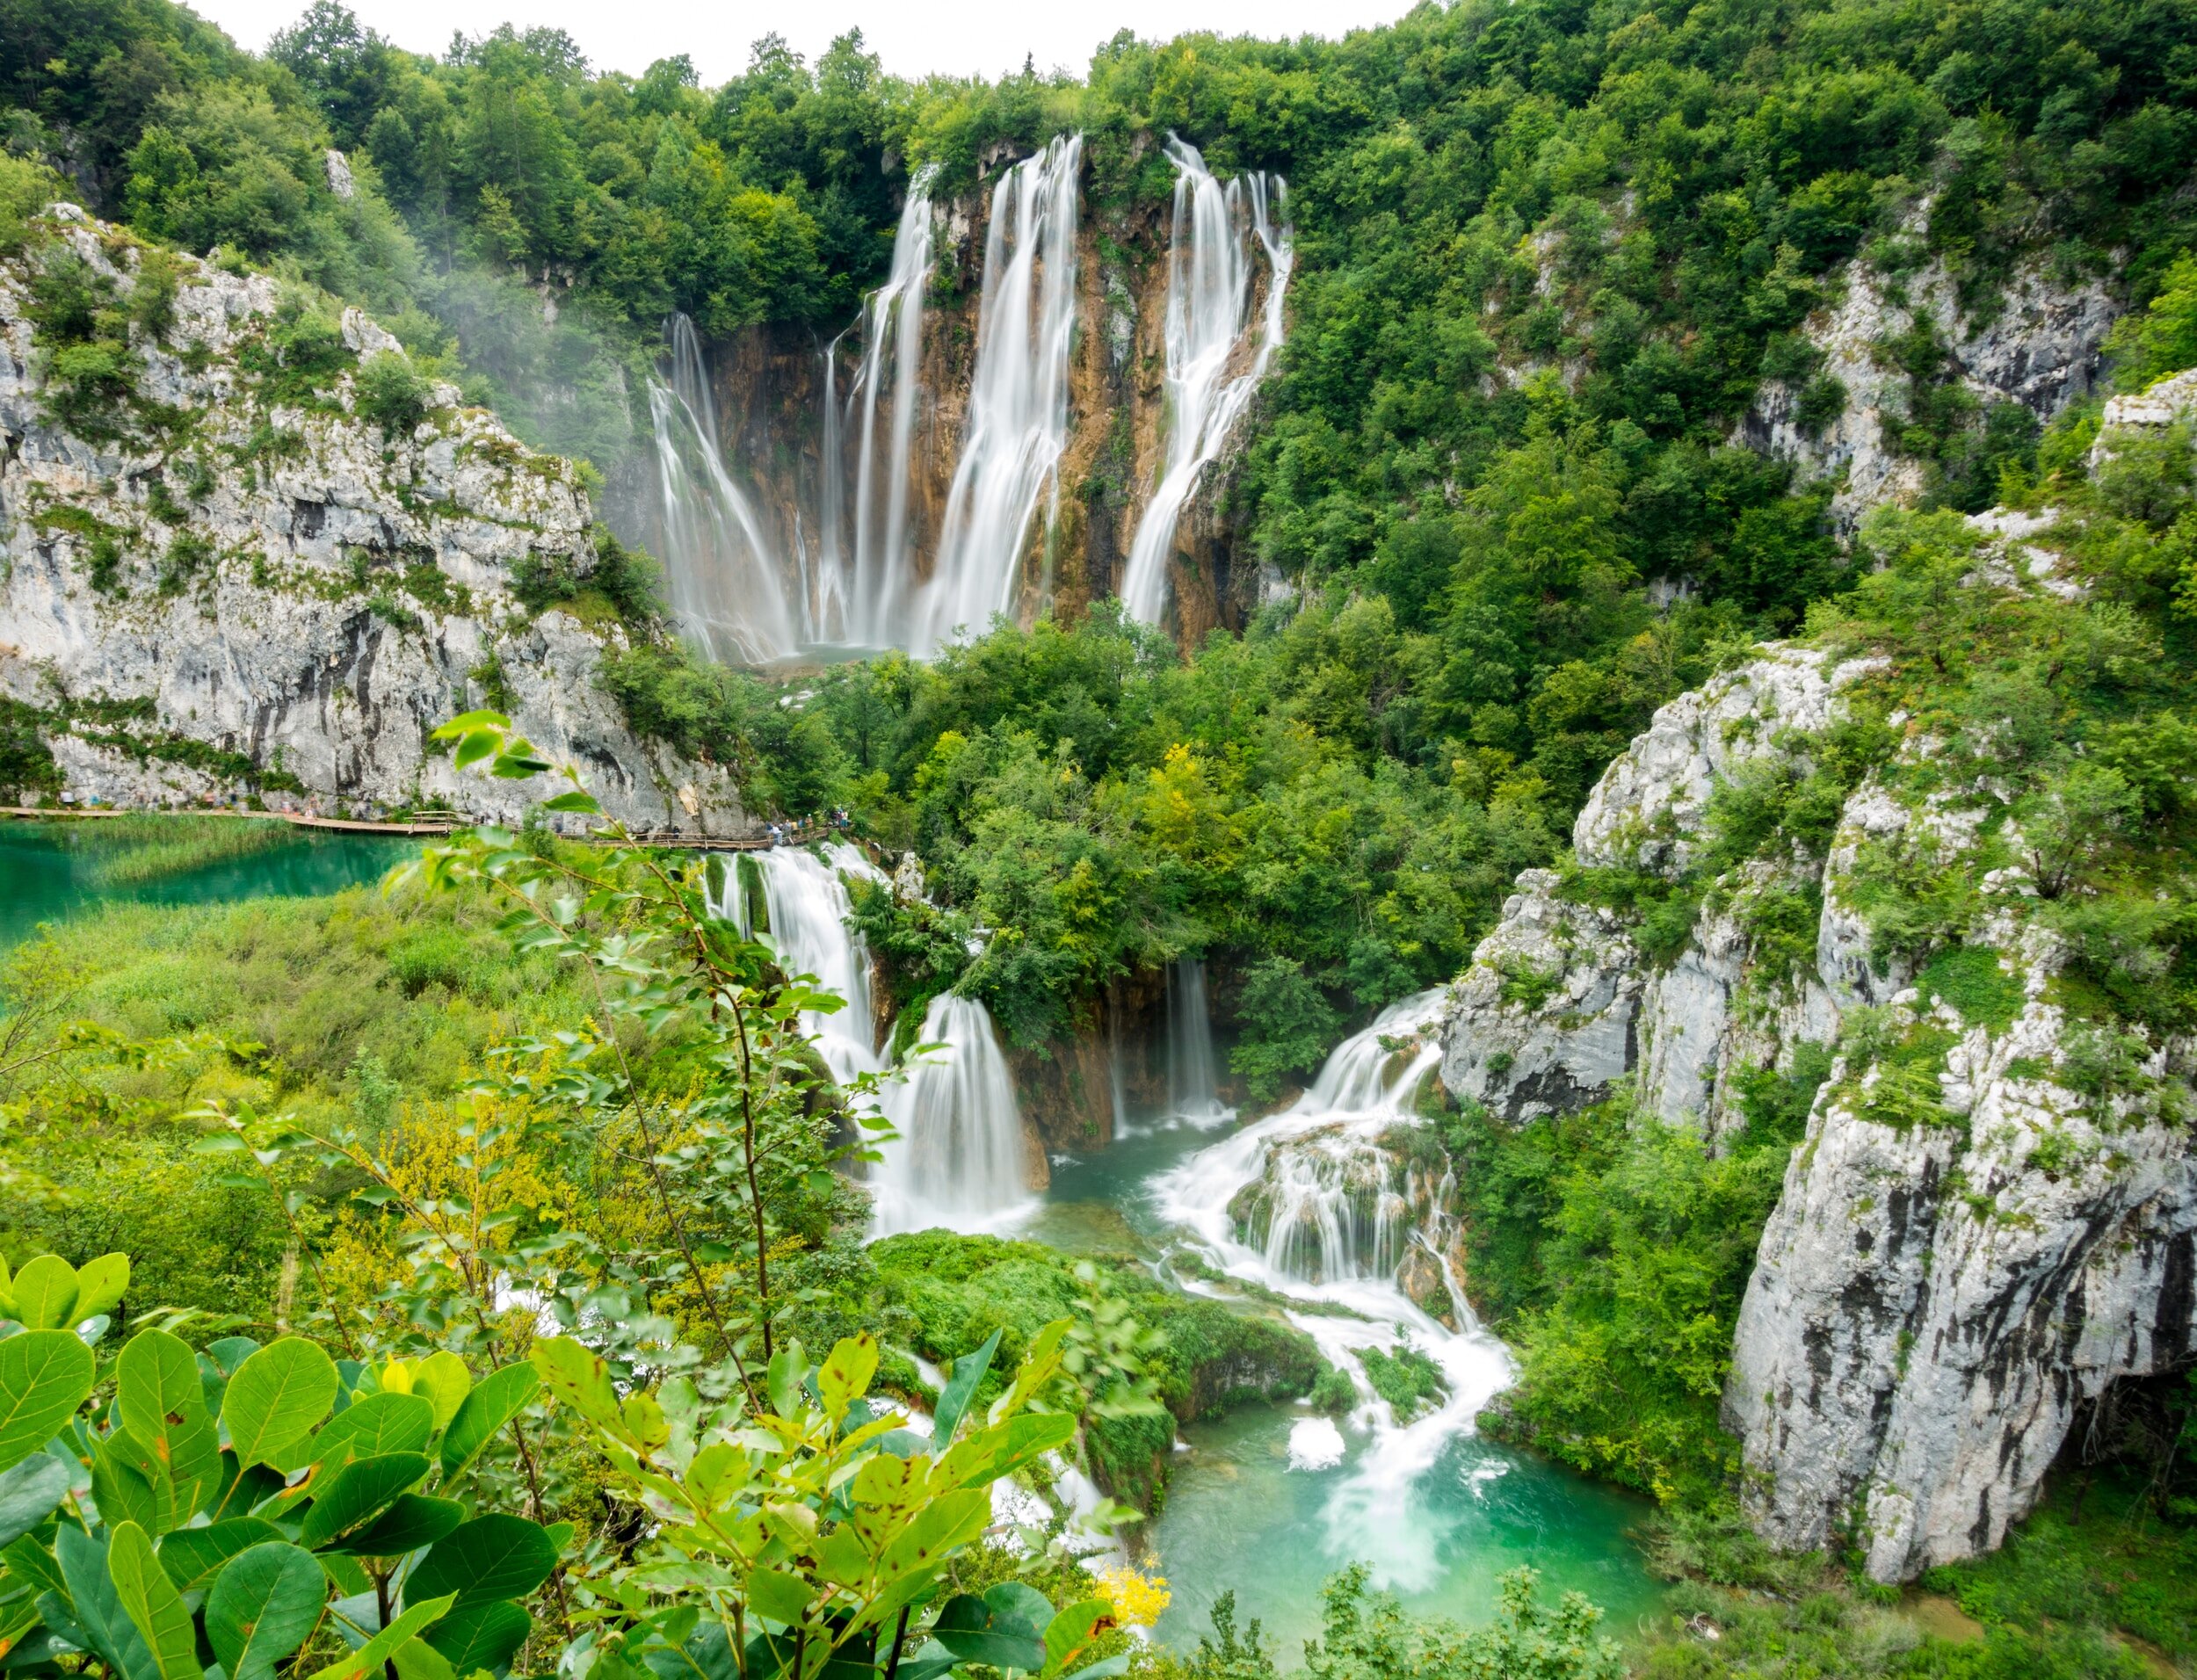 A waterfall surrounded by grey rocks and lush greenery in Plitvice Lakes National Park